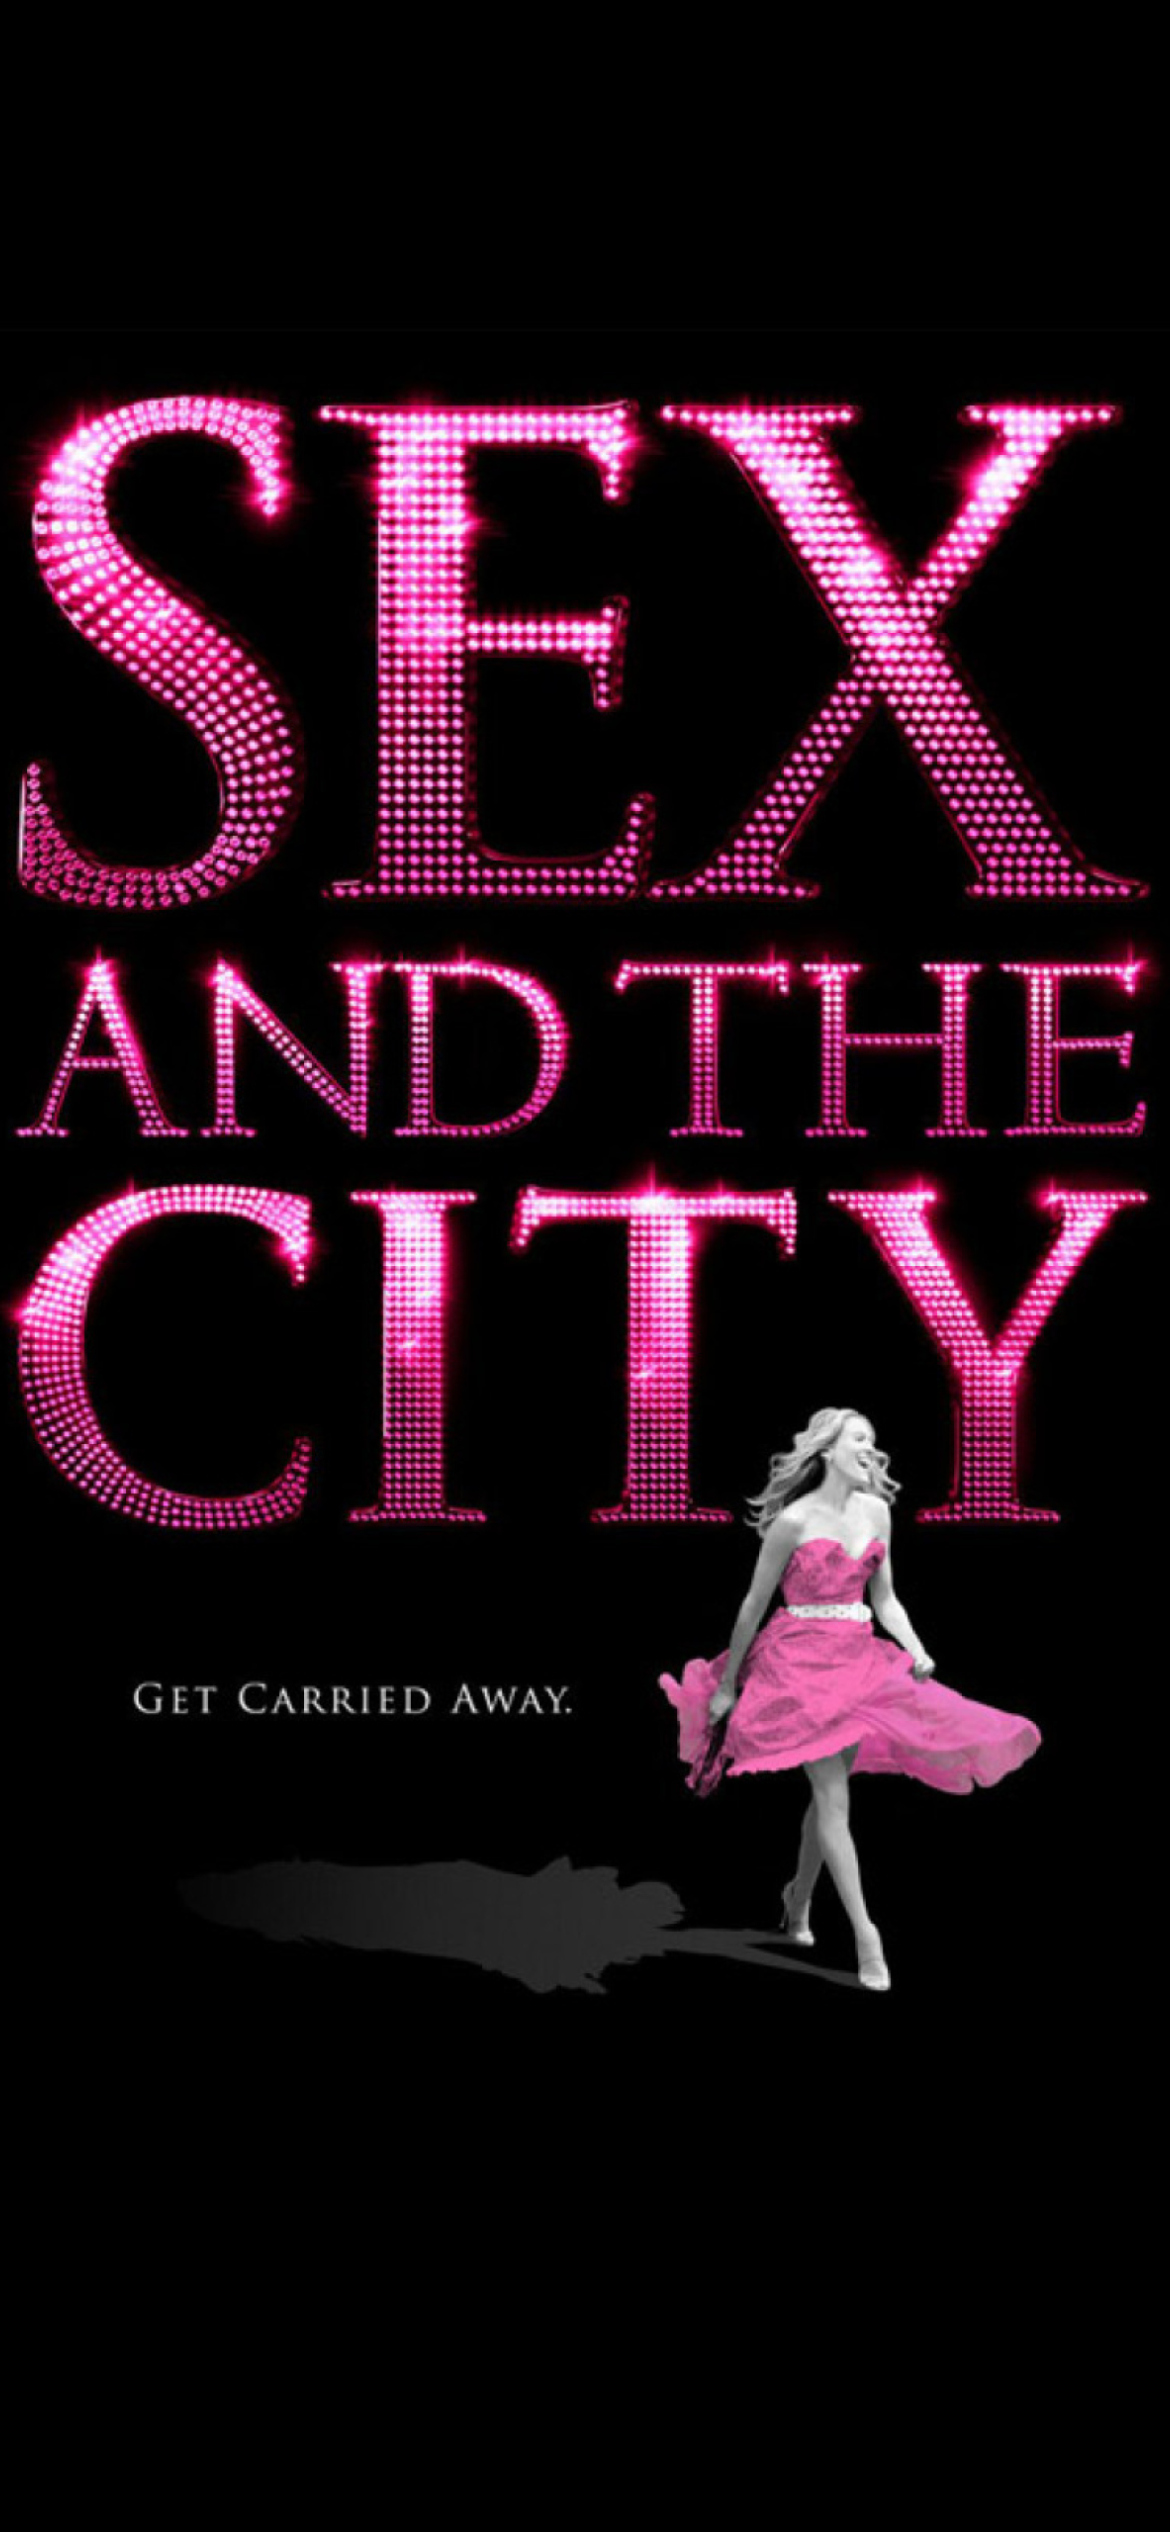 Sex And The City wallpaper 1170x2532